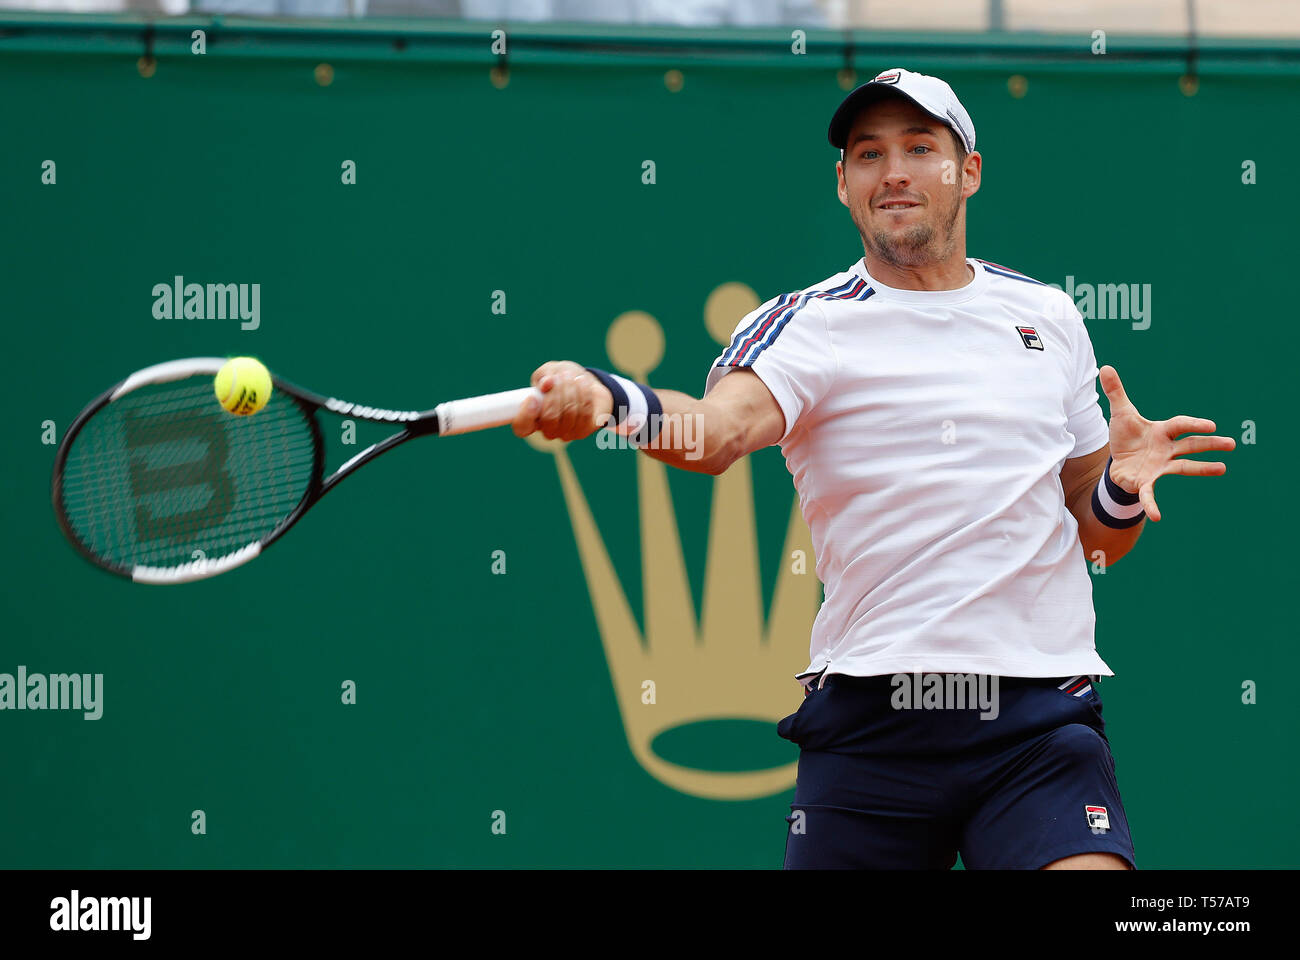 Roquebrune Cap Martin, France. 21st Apr, 2019. Dusan Jacovic of Serbia hits  a return during the men's singles final match against Fabio Fognini of  Italy at the Monte-Carlo Rolex Masters tennis tournament